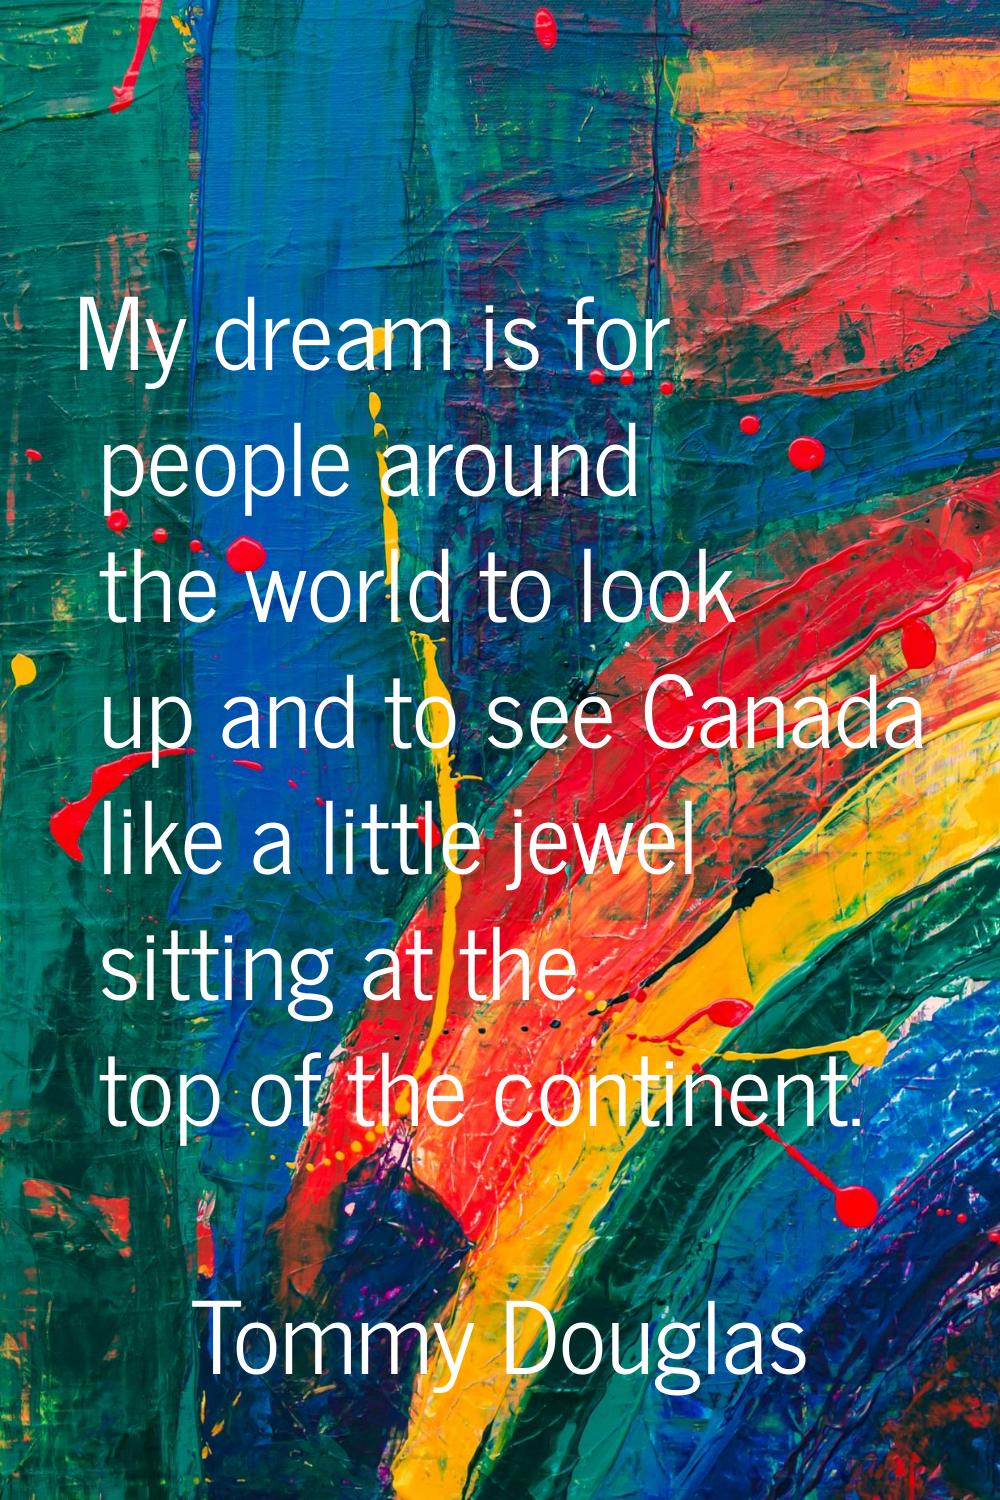 My dream is for people around the world to look up and to see Canada like a little jewel sitting at